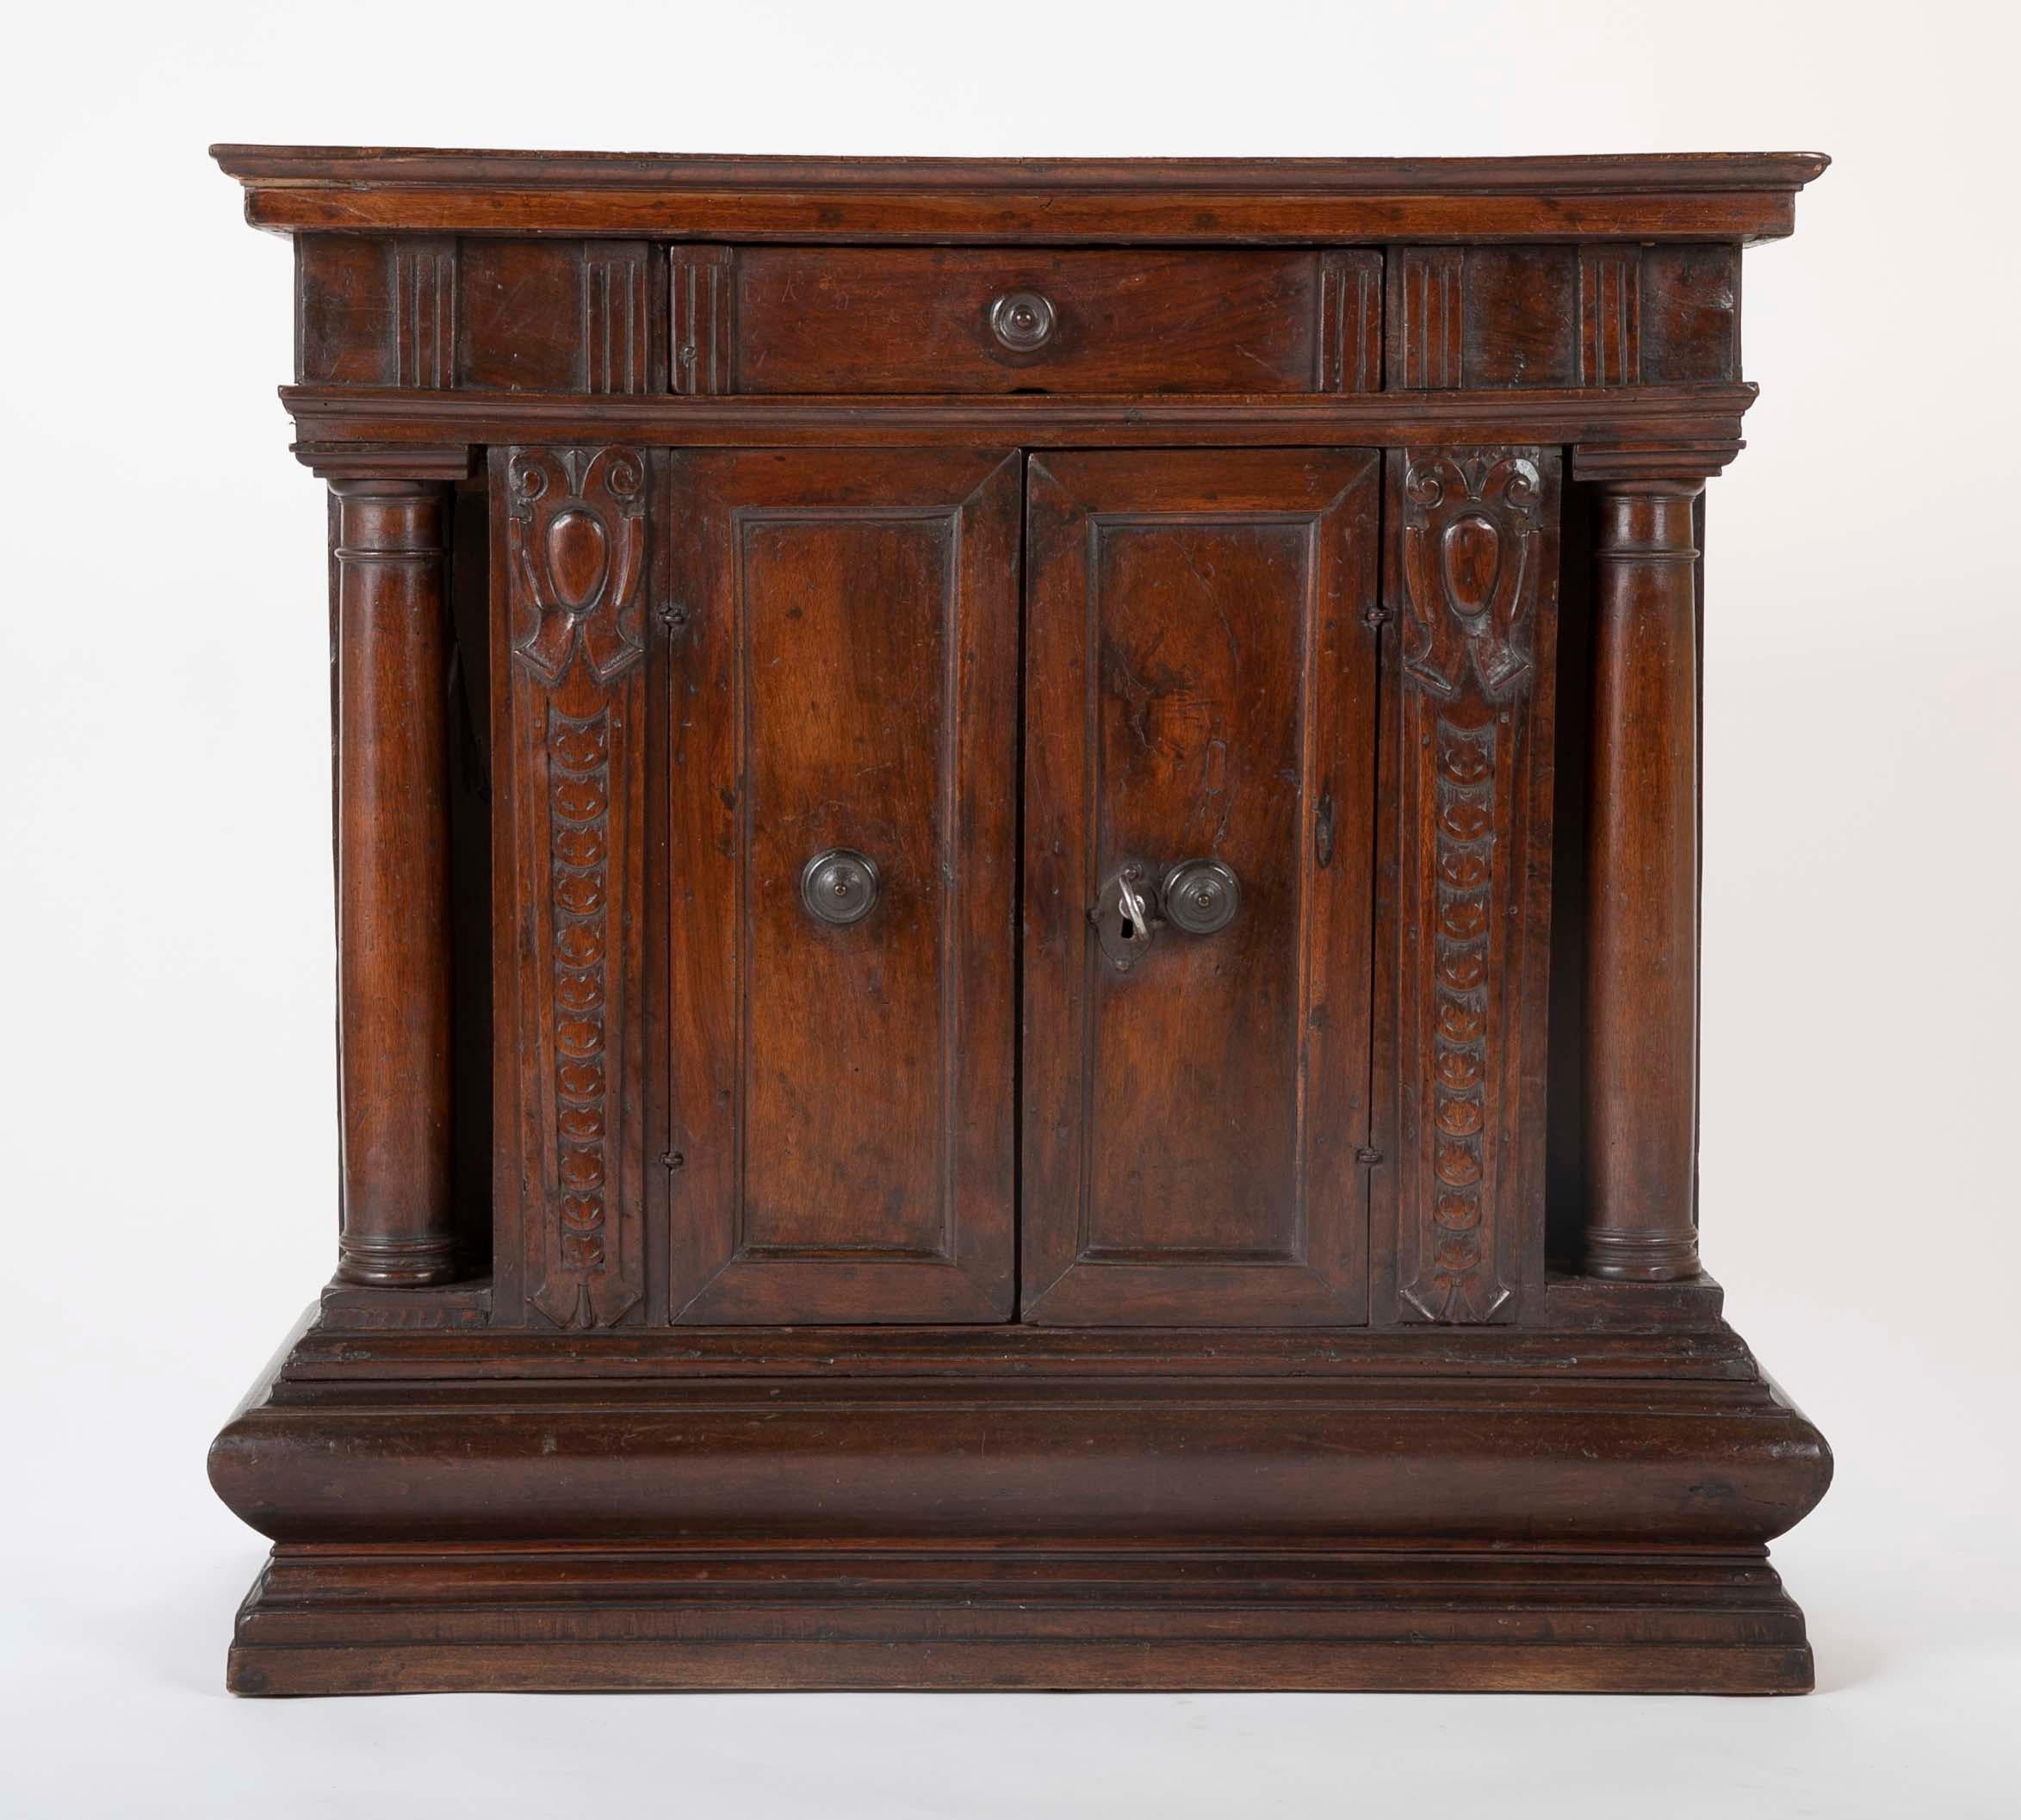 An Italian Baroque Tuscan credenza of classical form with columns carved fully in the round at the corners. A single drawer over a two-door cabinet all with turned bronze pulls. A working key and lock of later date, the interior painted. The walnut